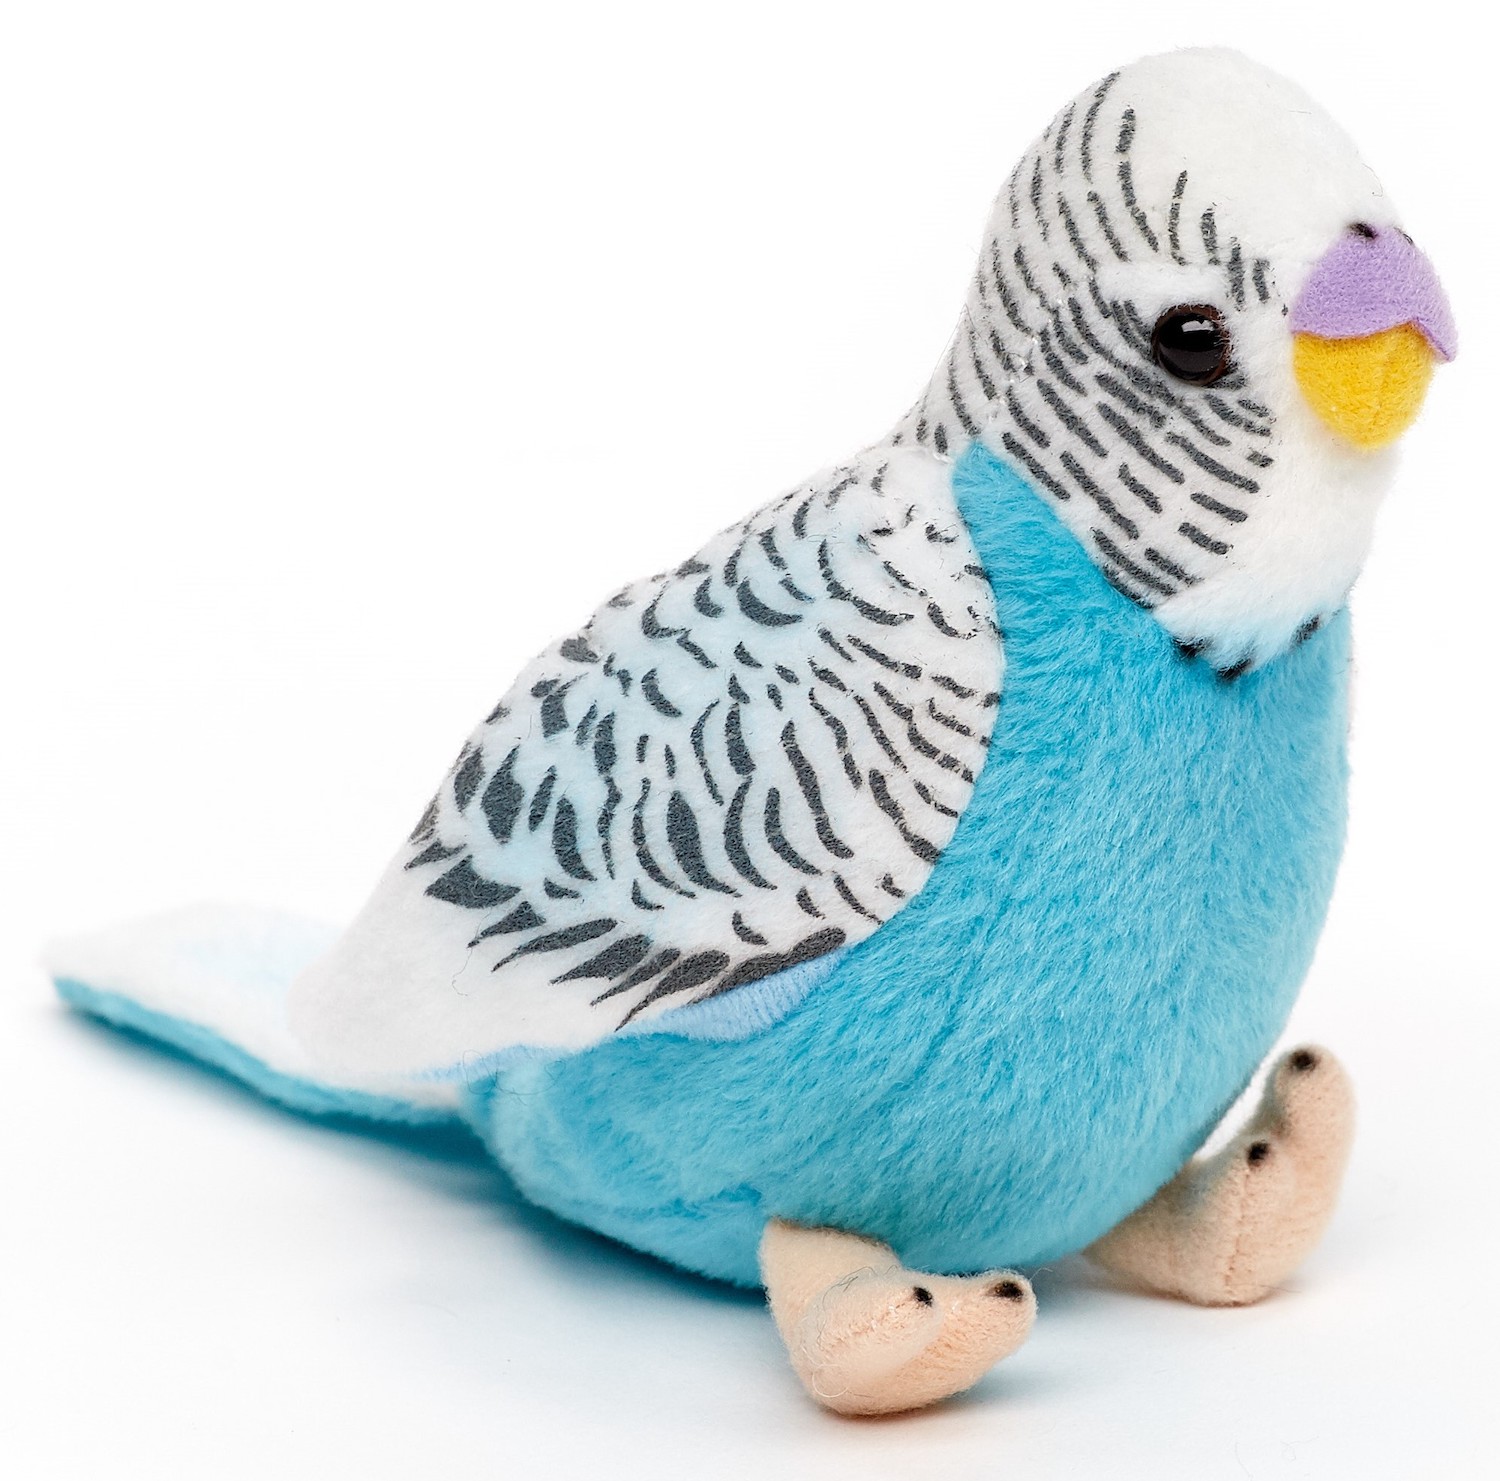 Budgie without voice (blue) - 12 cm (height) - plush bird - soft toy, cuddly toy